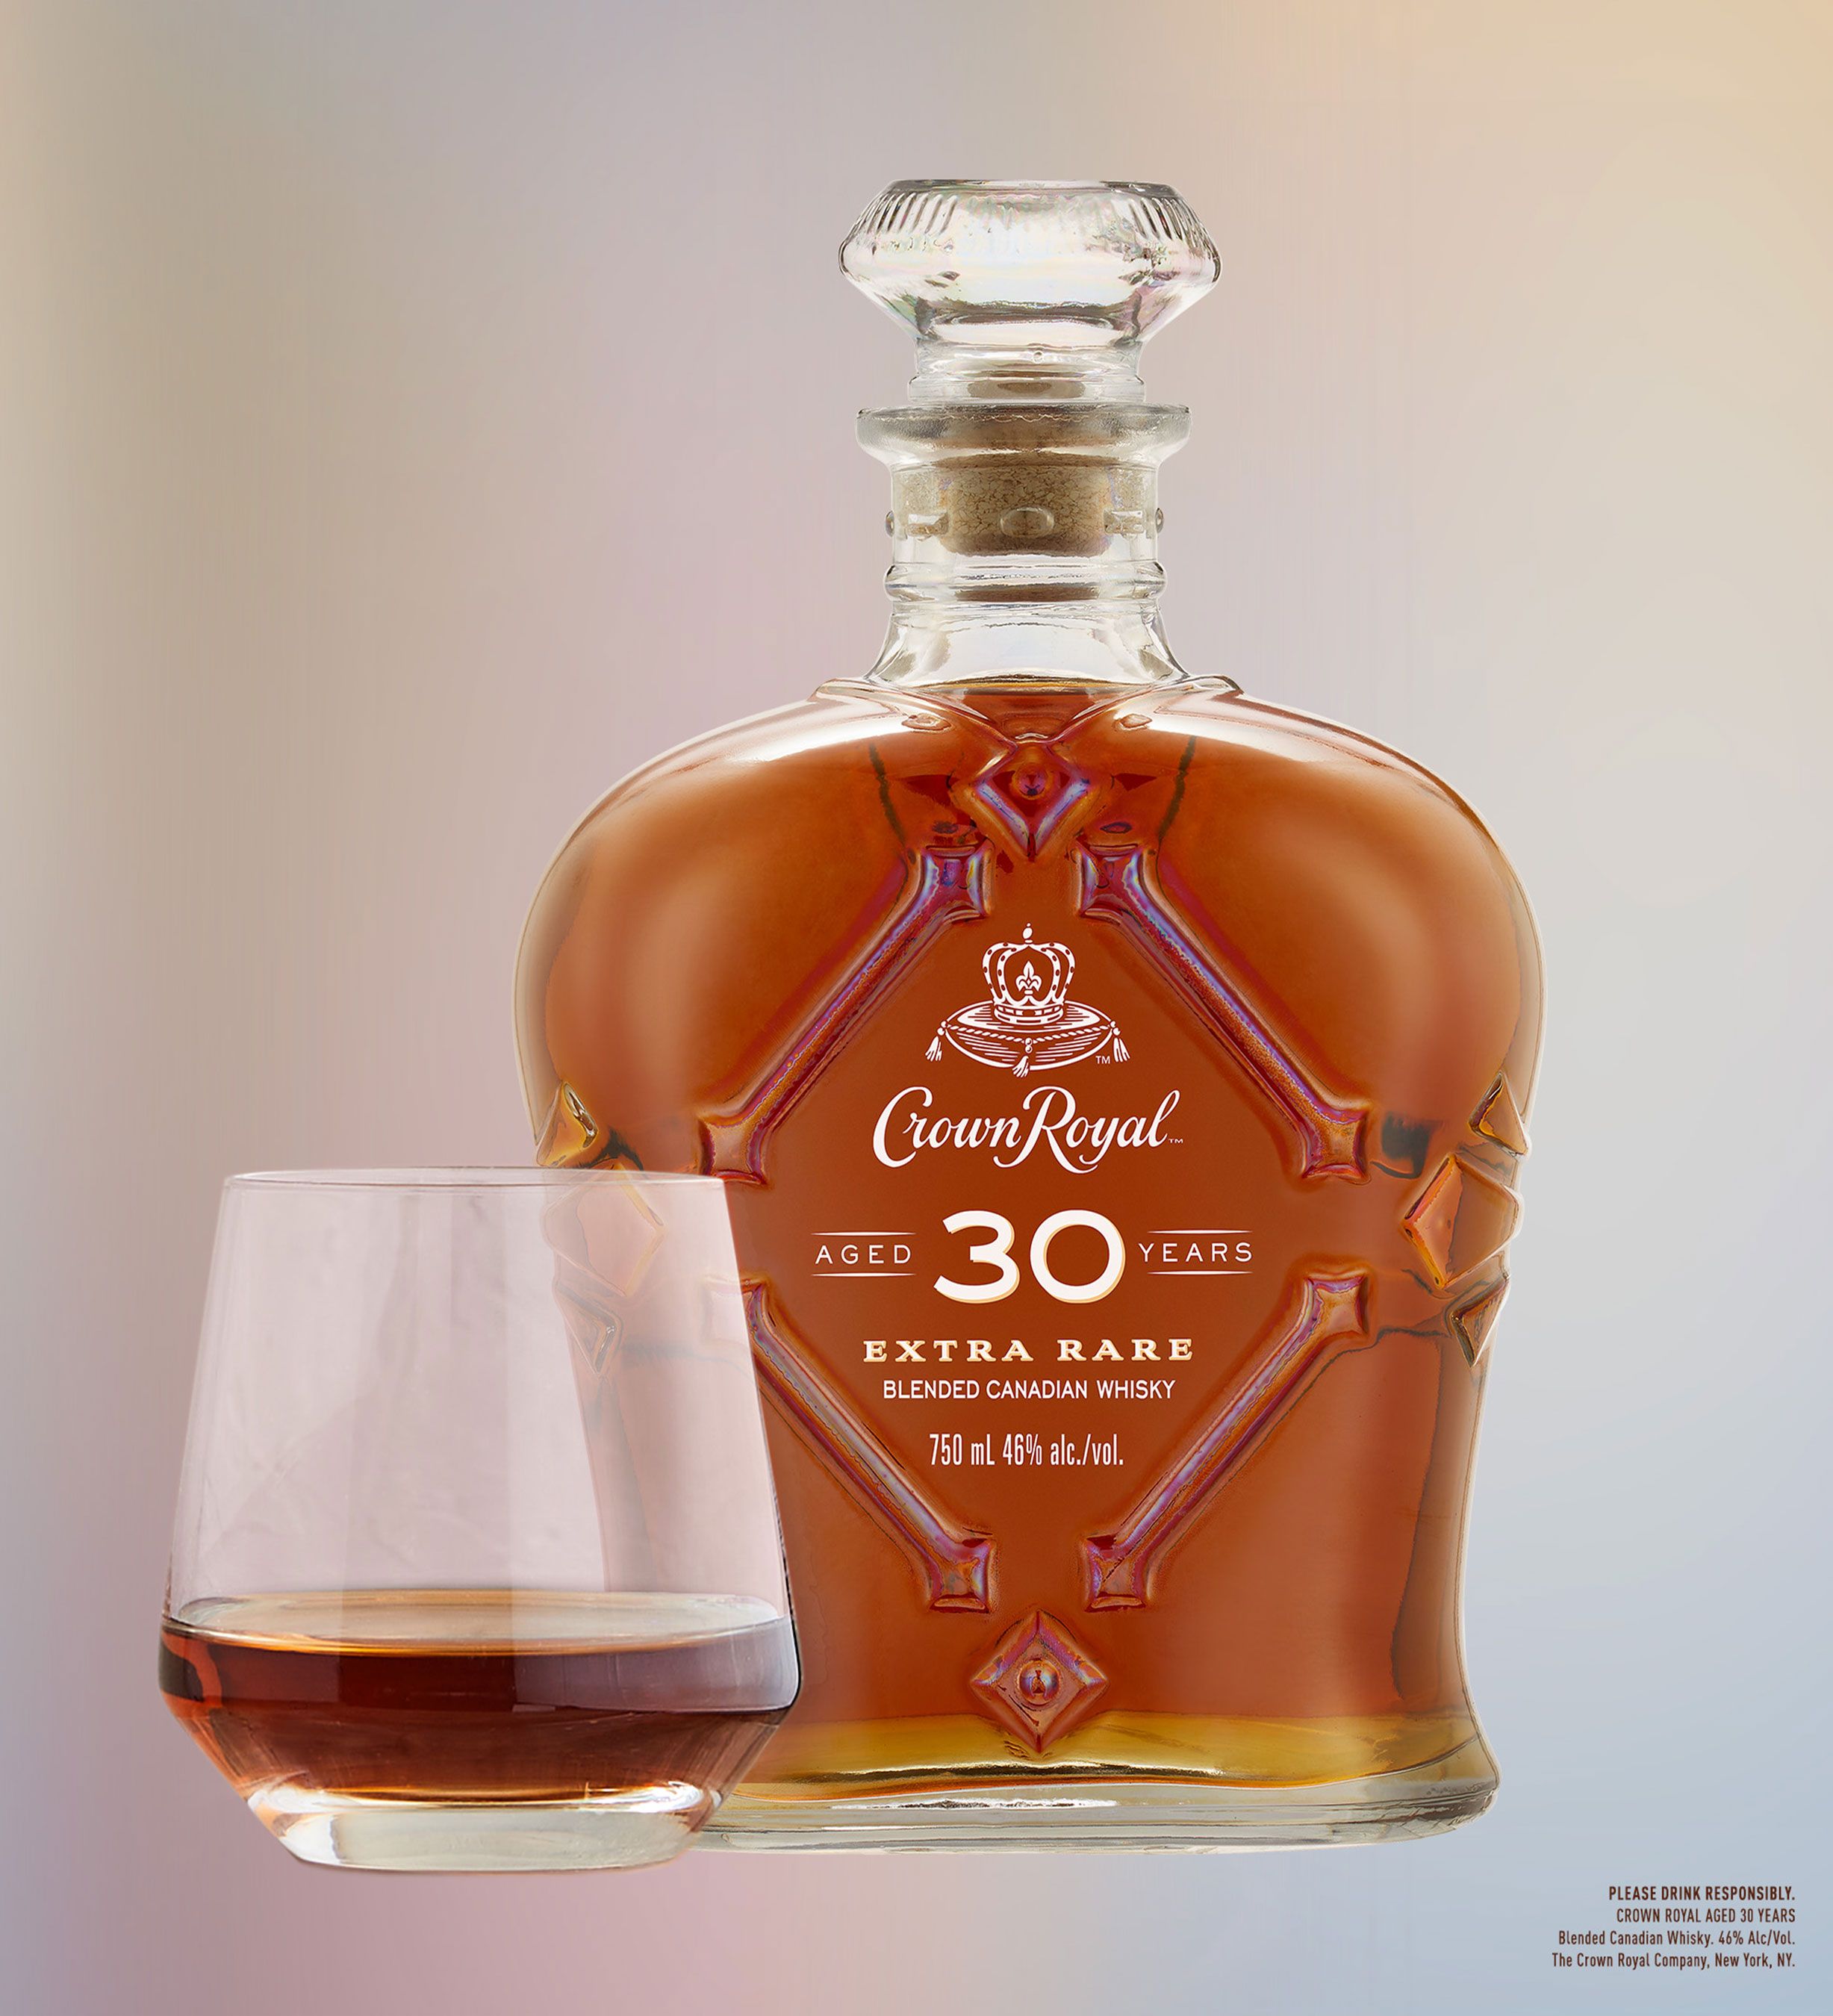 Crown Royal Aged 30 Years with a neat pour